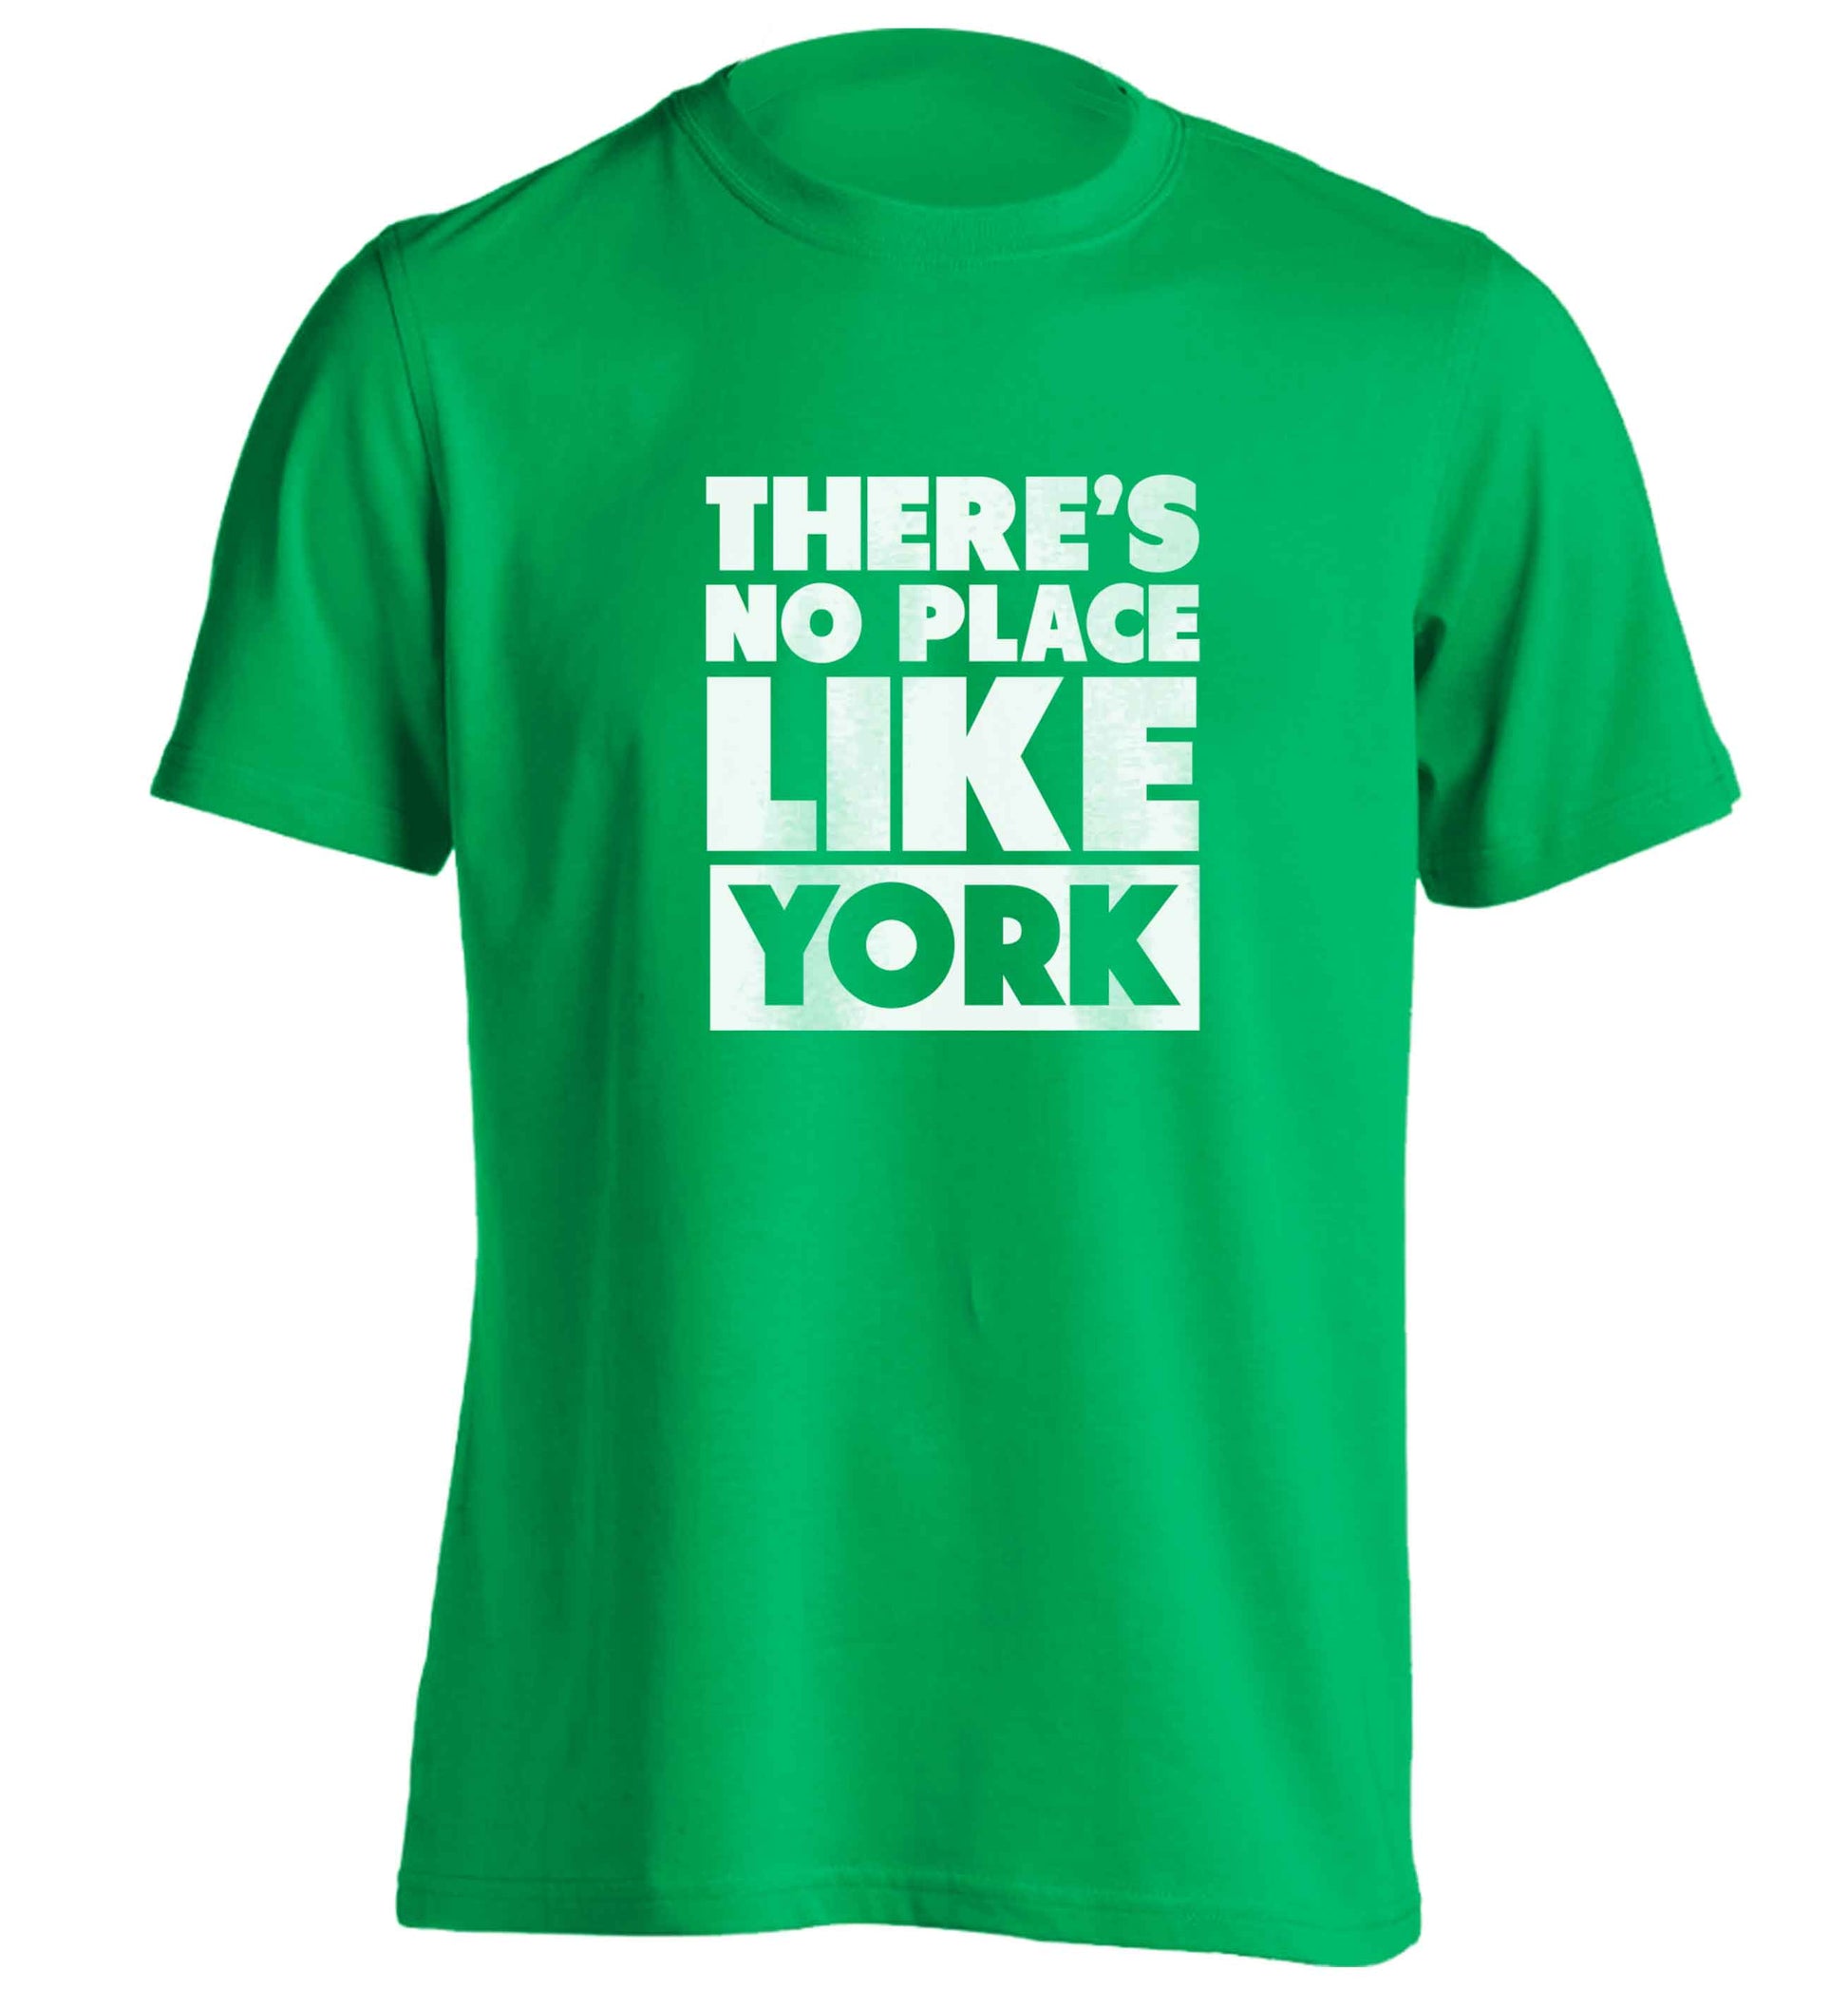 There's no place like york adults unisex green Tshirt 2XL